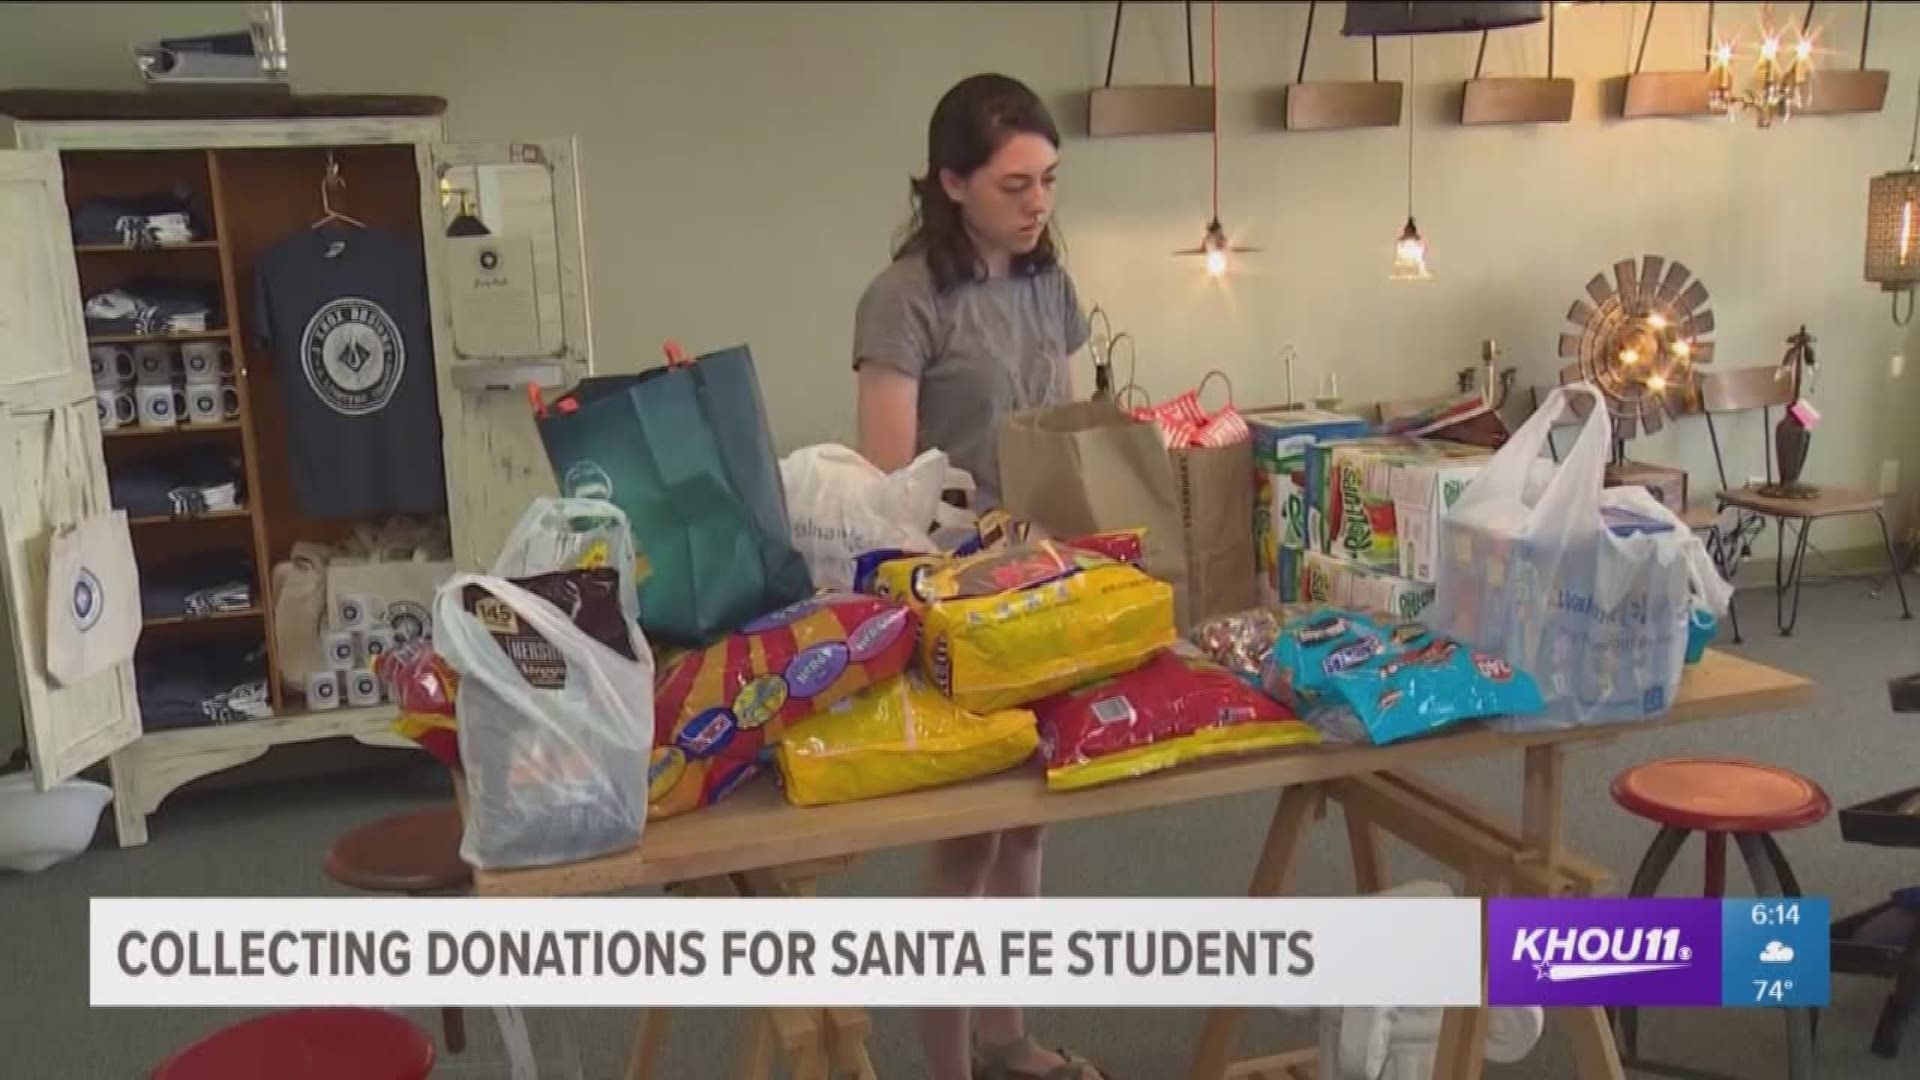 Donations are being collected for survivors of the Santa Fe school shooting. The donations will be distributed at a free community dinner in La Marque. 